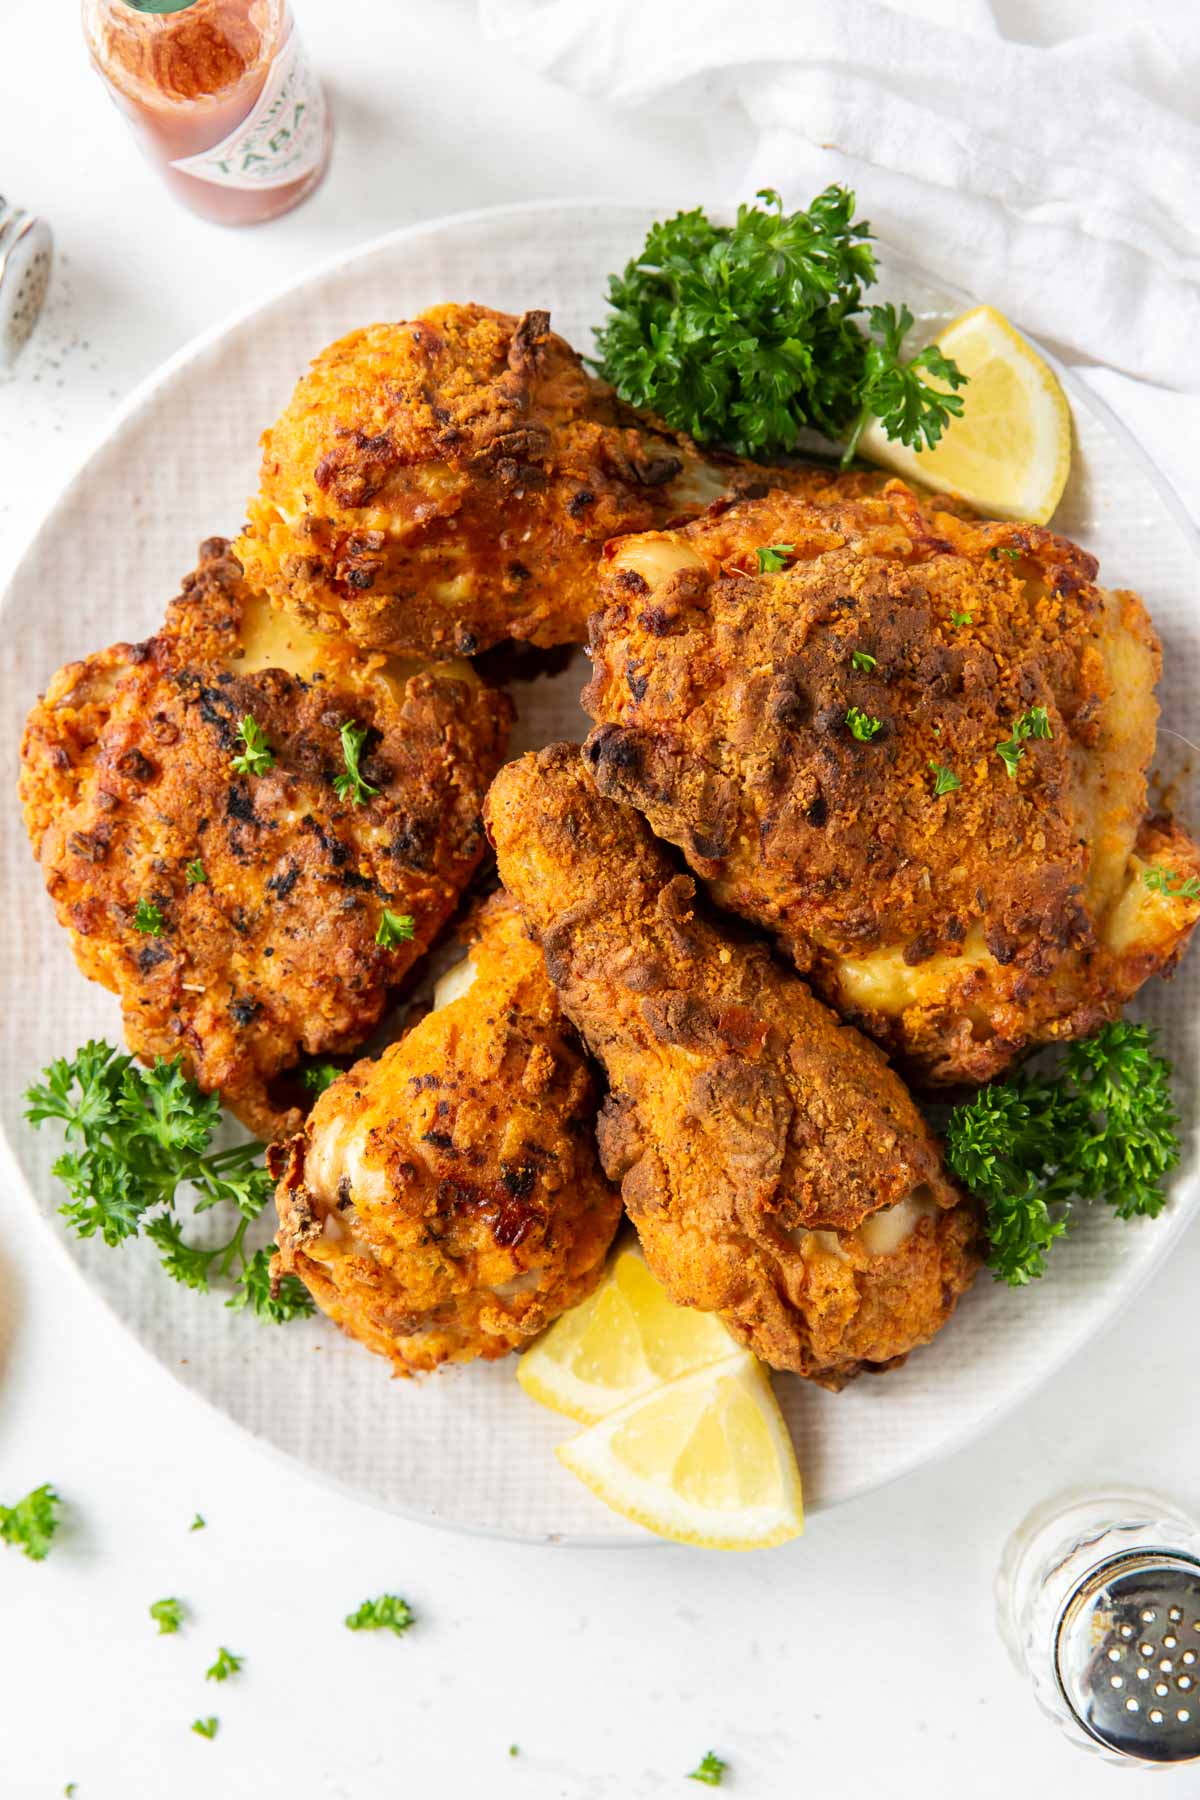 air fryer fried chicken legs and thighs on a plate garnished with parsley and lemon